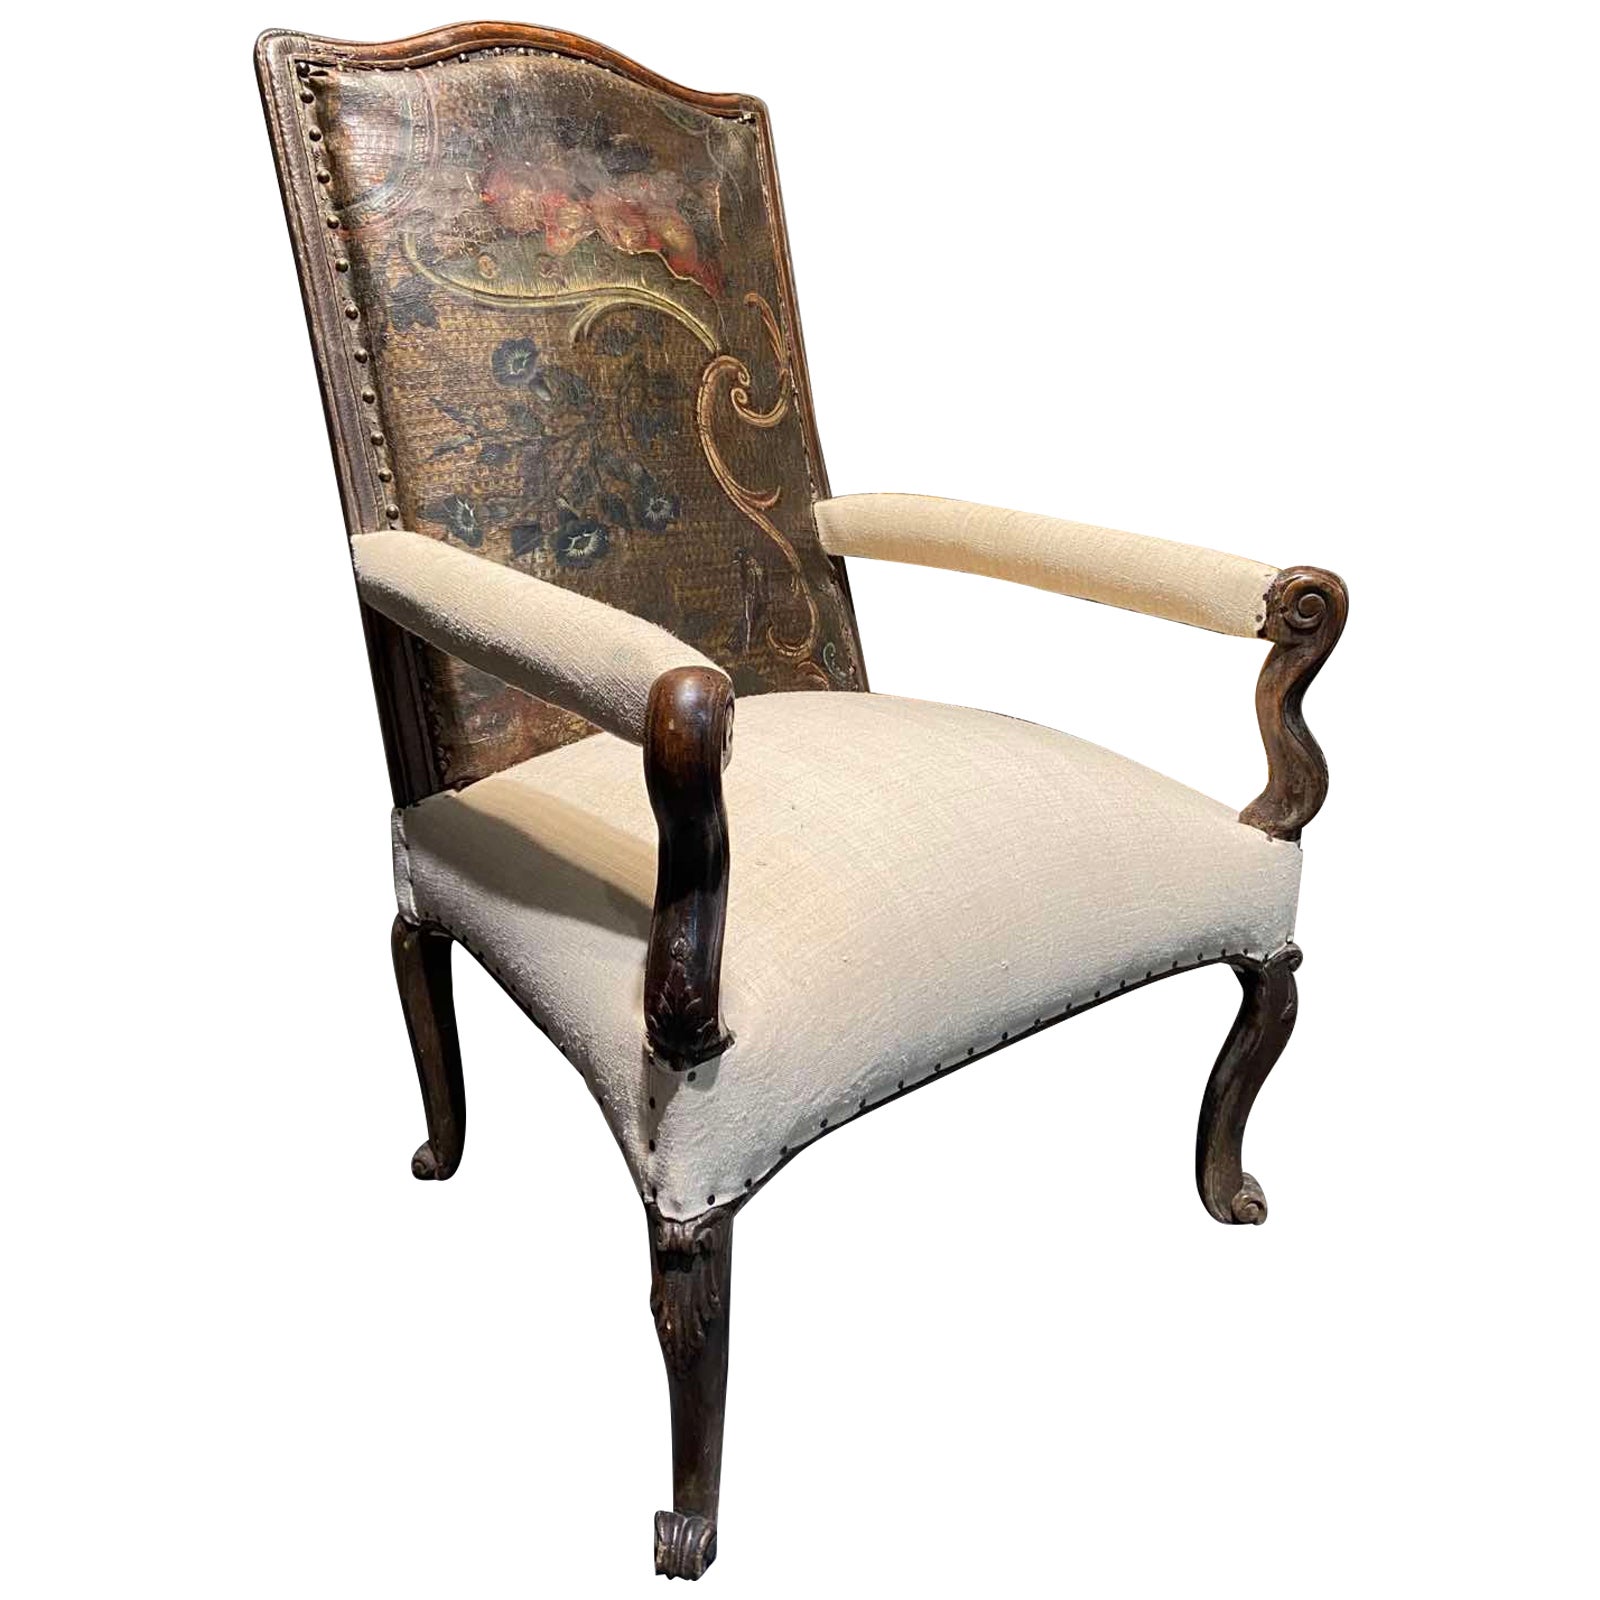 18th Century Armchair with High Backrest in Carved Wood and Cordoba Leather